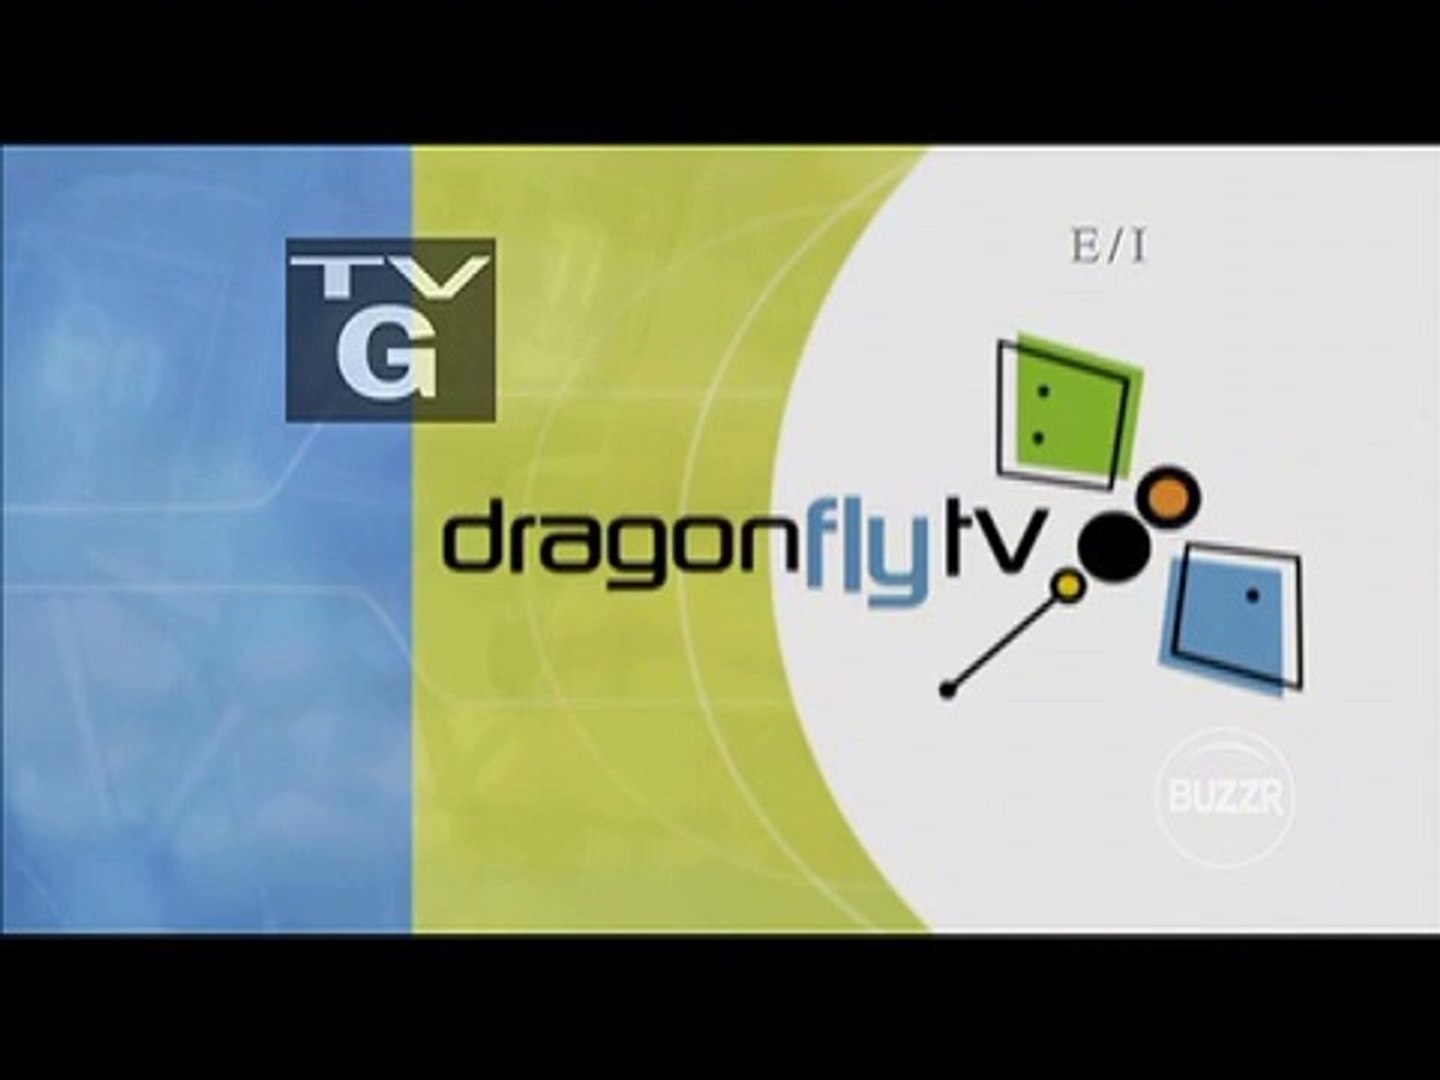 Dragonfly TV (April 3, 2004): Space/Astronomy